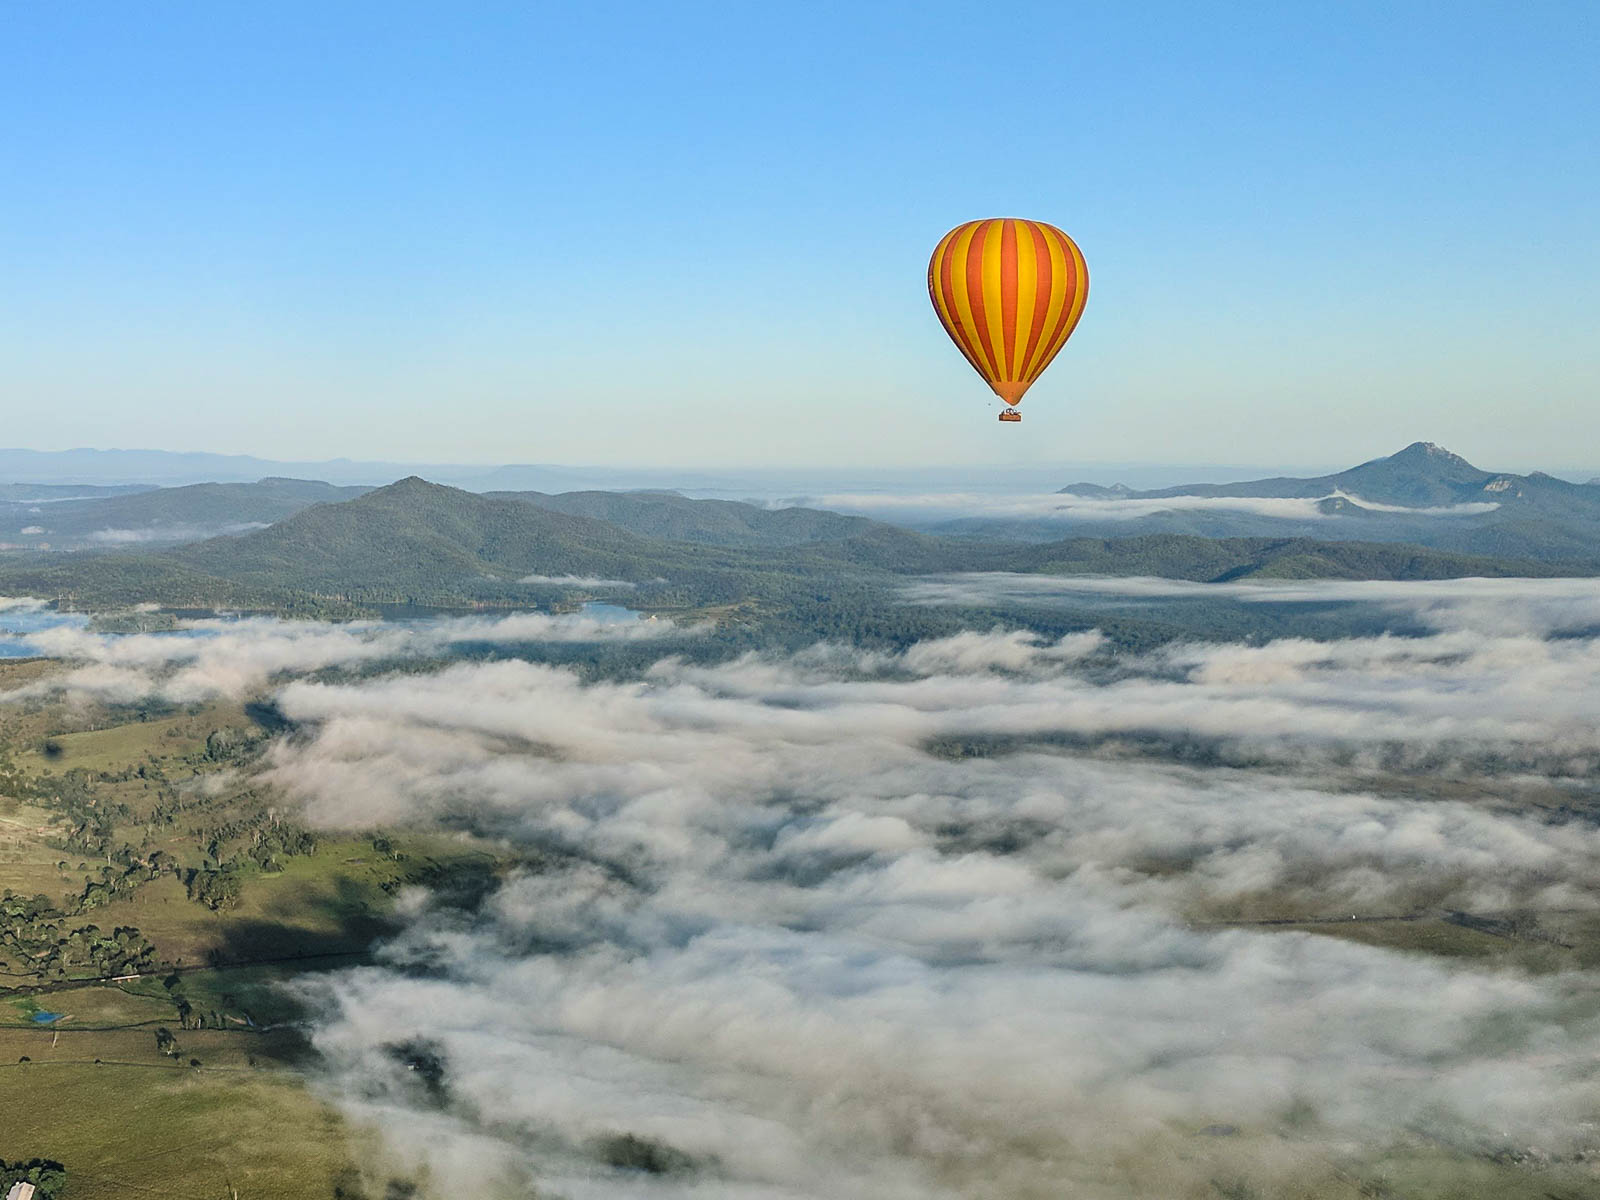 Enjoy flying in a hot air balloon on the scenic gold coast hinterland